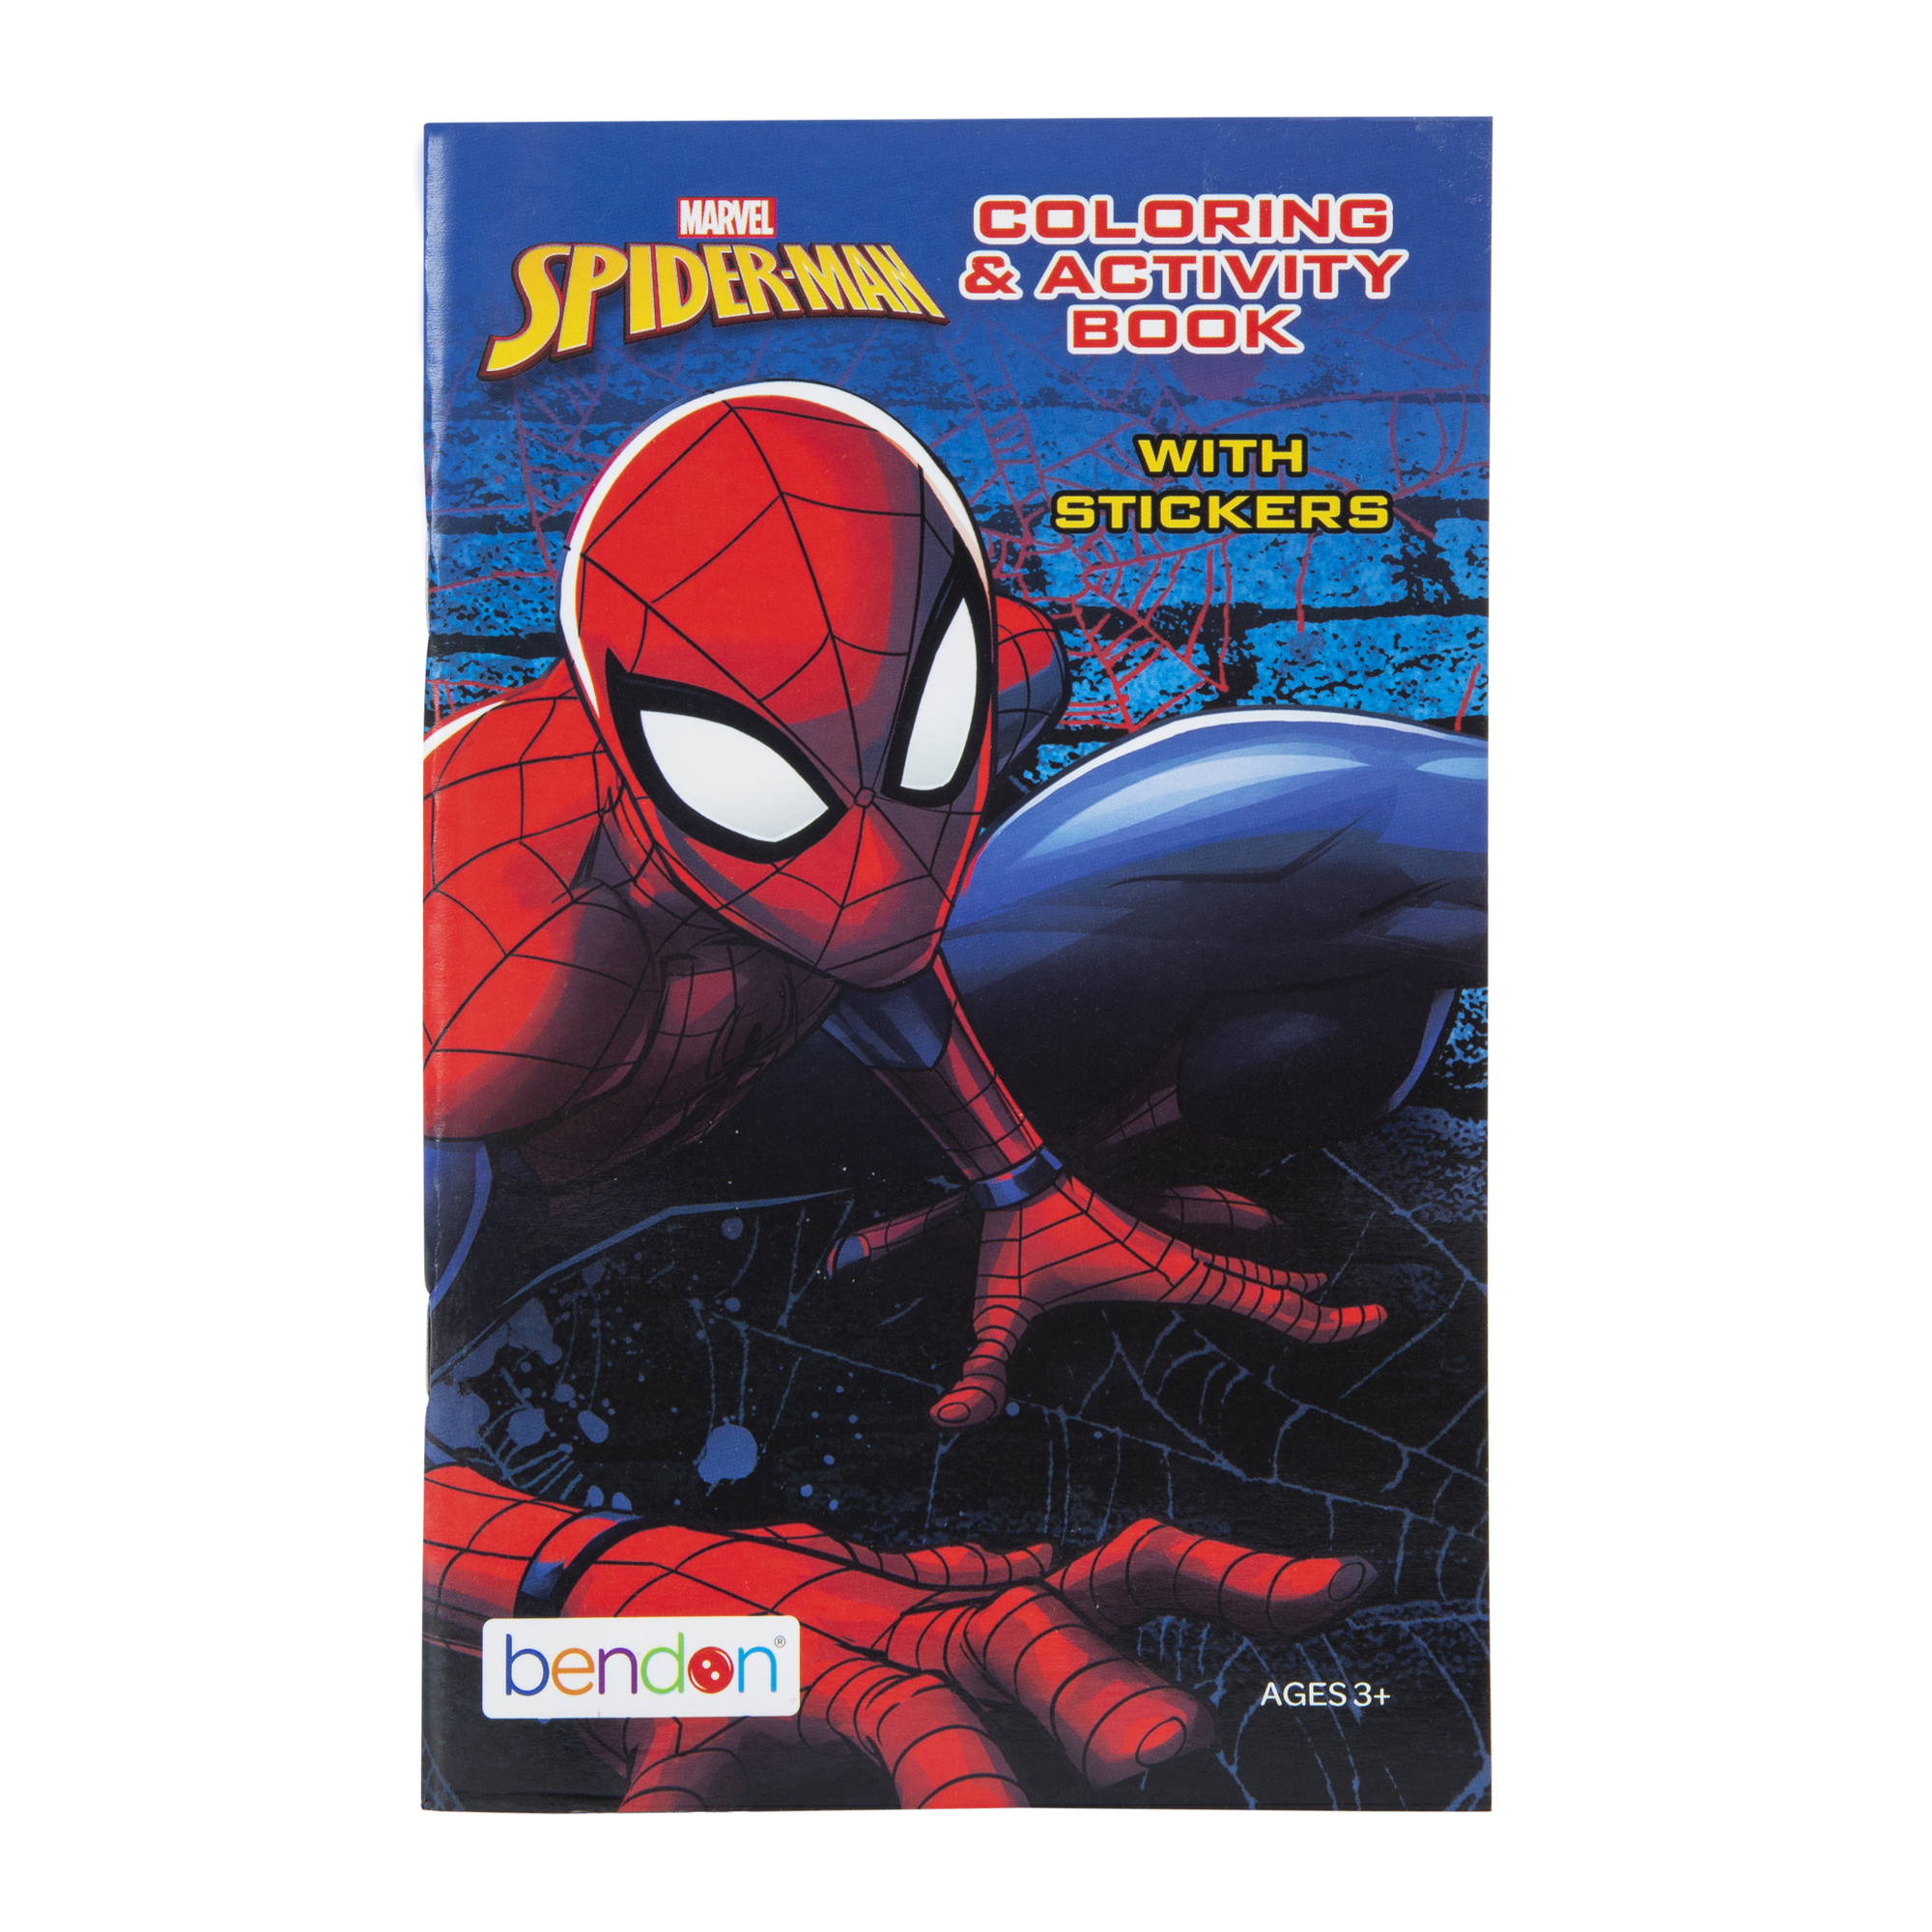 Spider-Man coloring & activity book with stickers